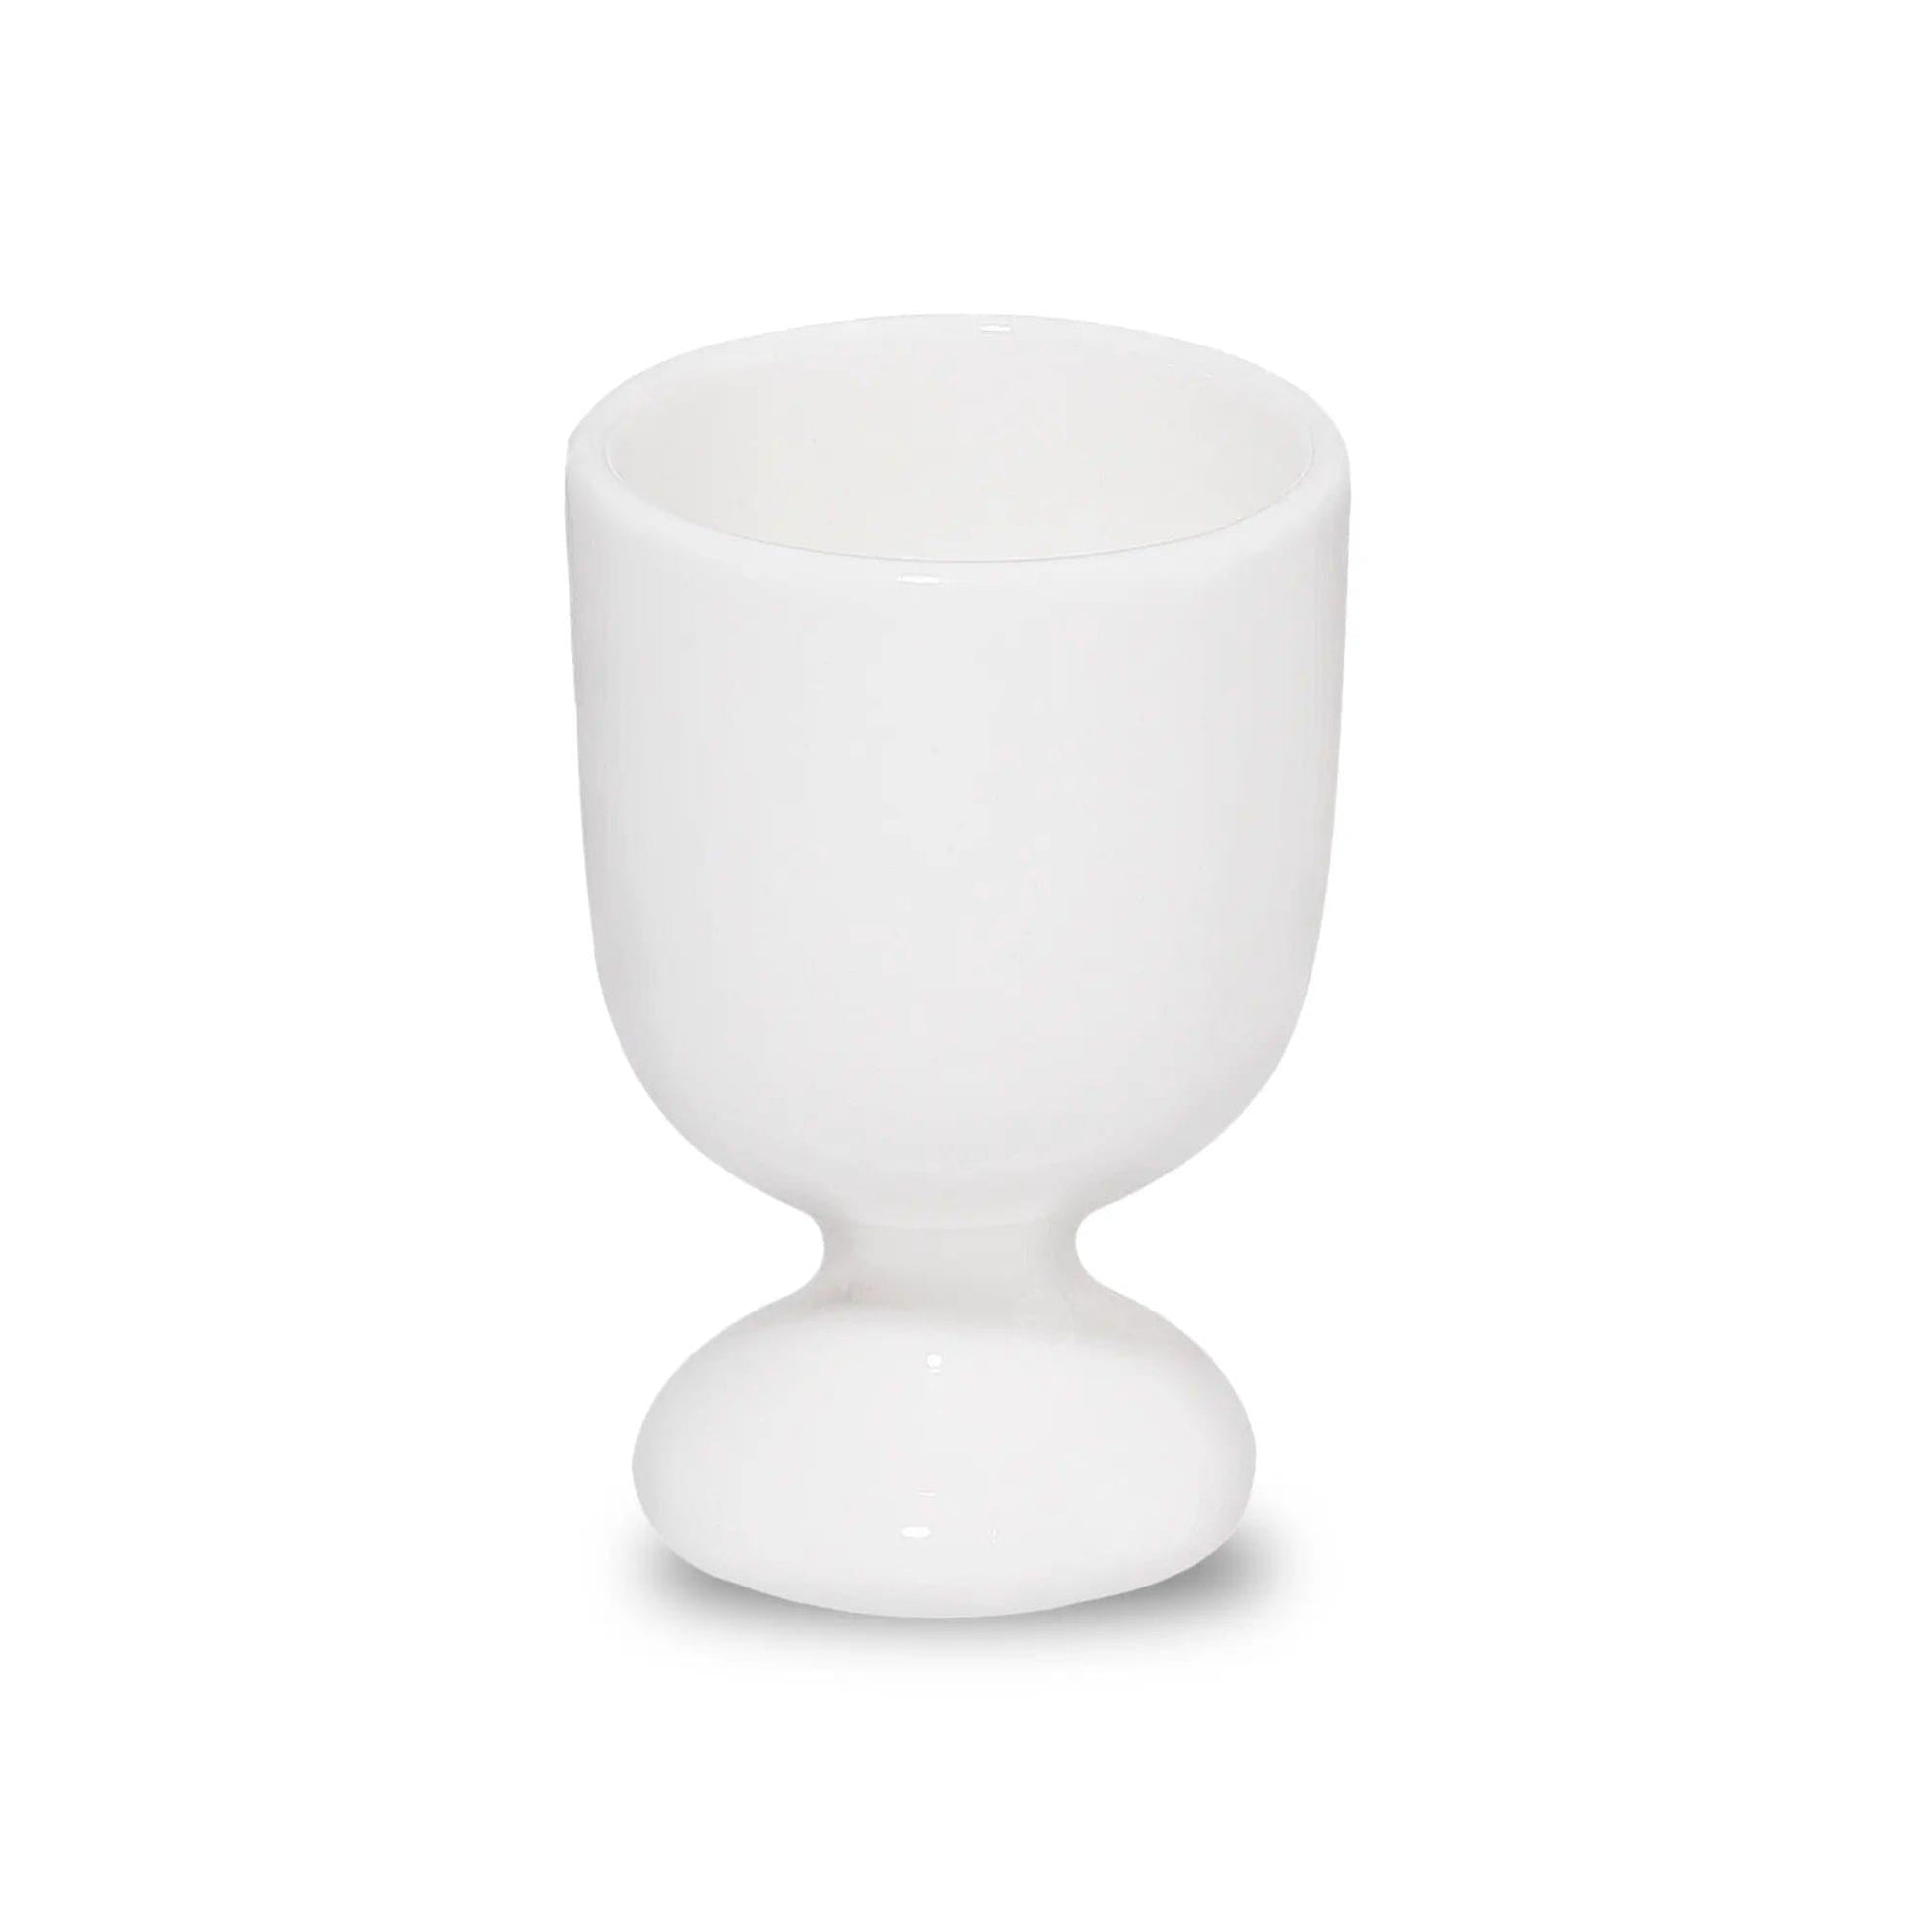 Furtino England Finesse White Round Porcelain Egg Cup 6/Case